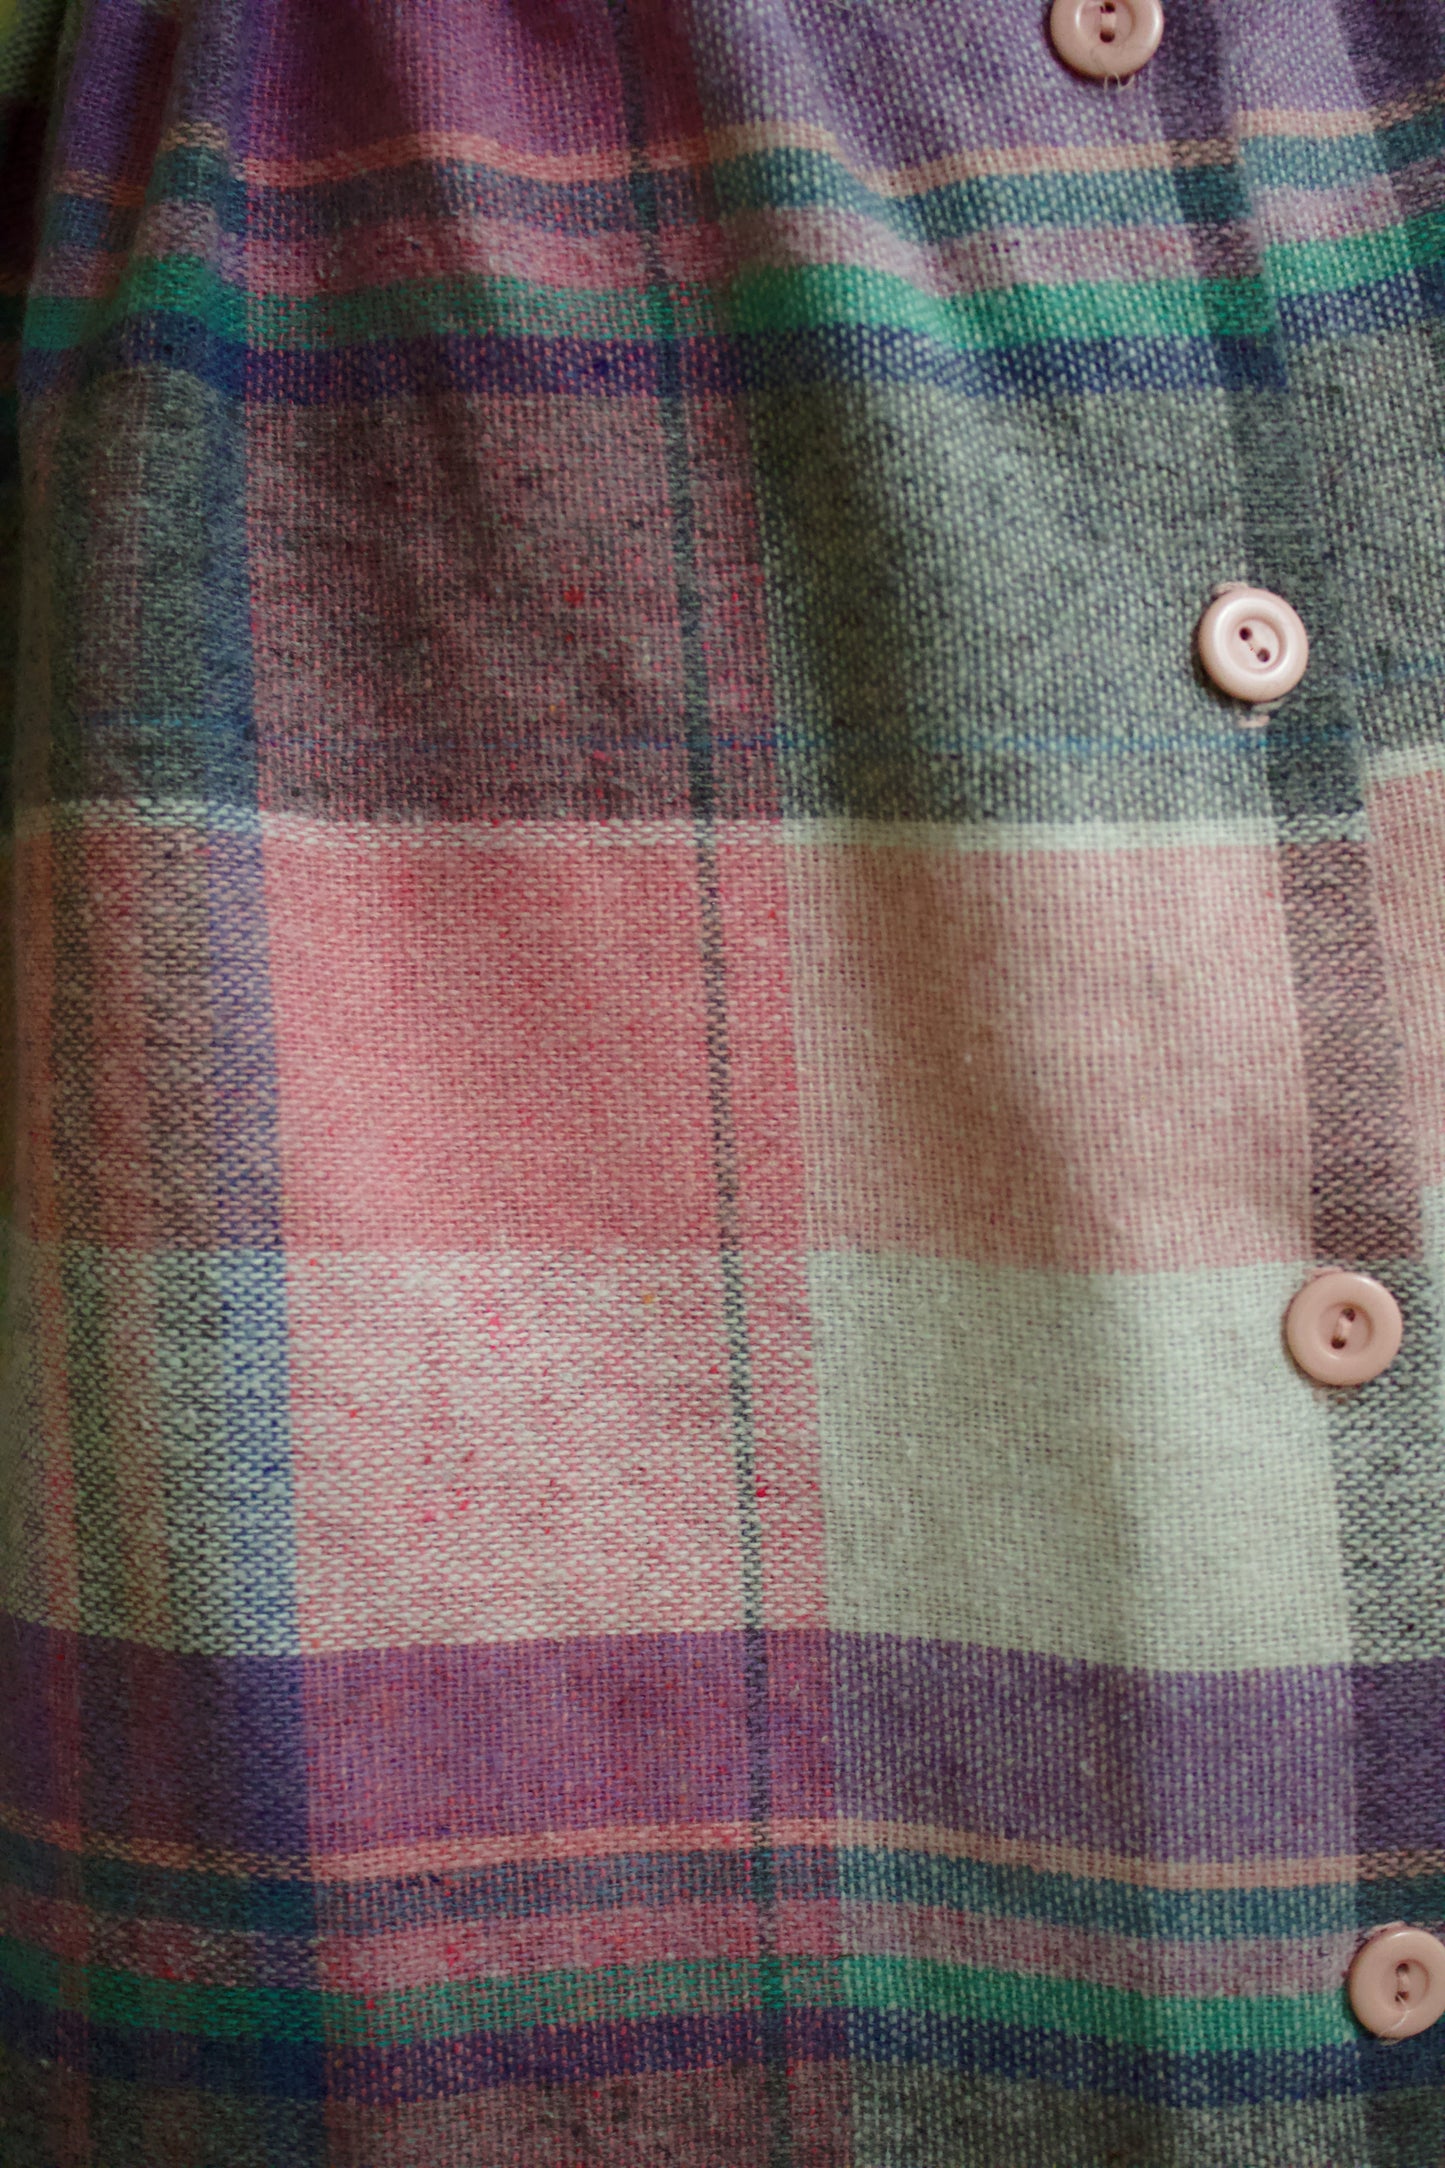 1980s Kayo Italian Wool Blend Mid Length Skirt with Pink Buttons in Blue, Pink and White Flannel